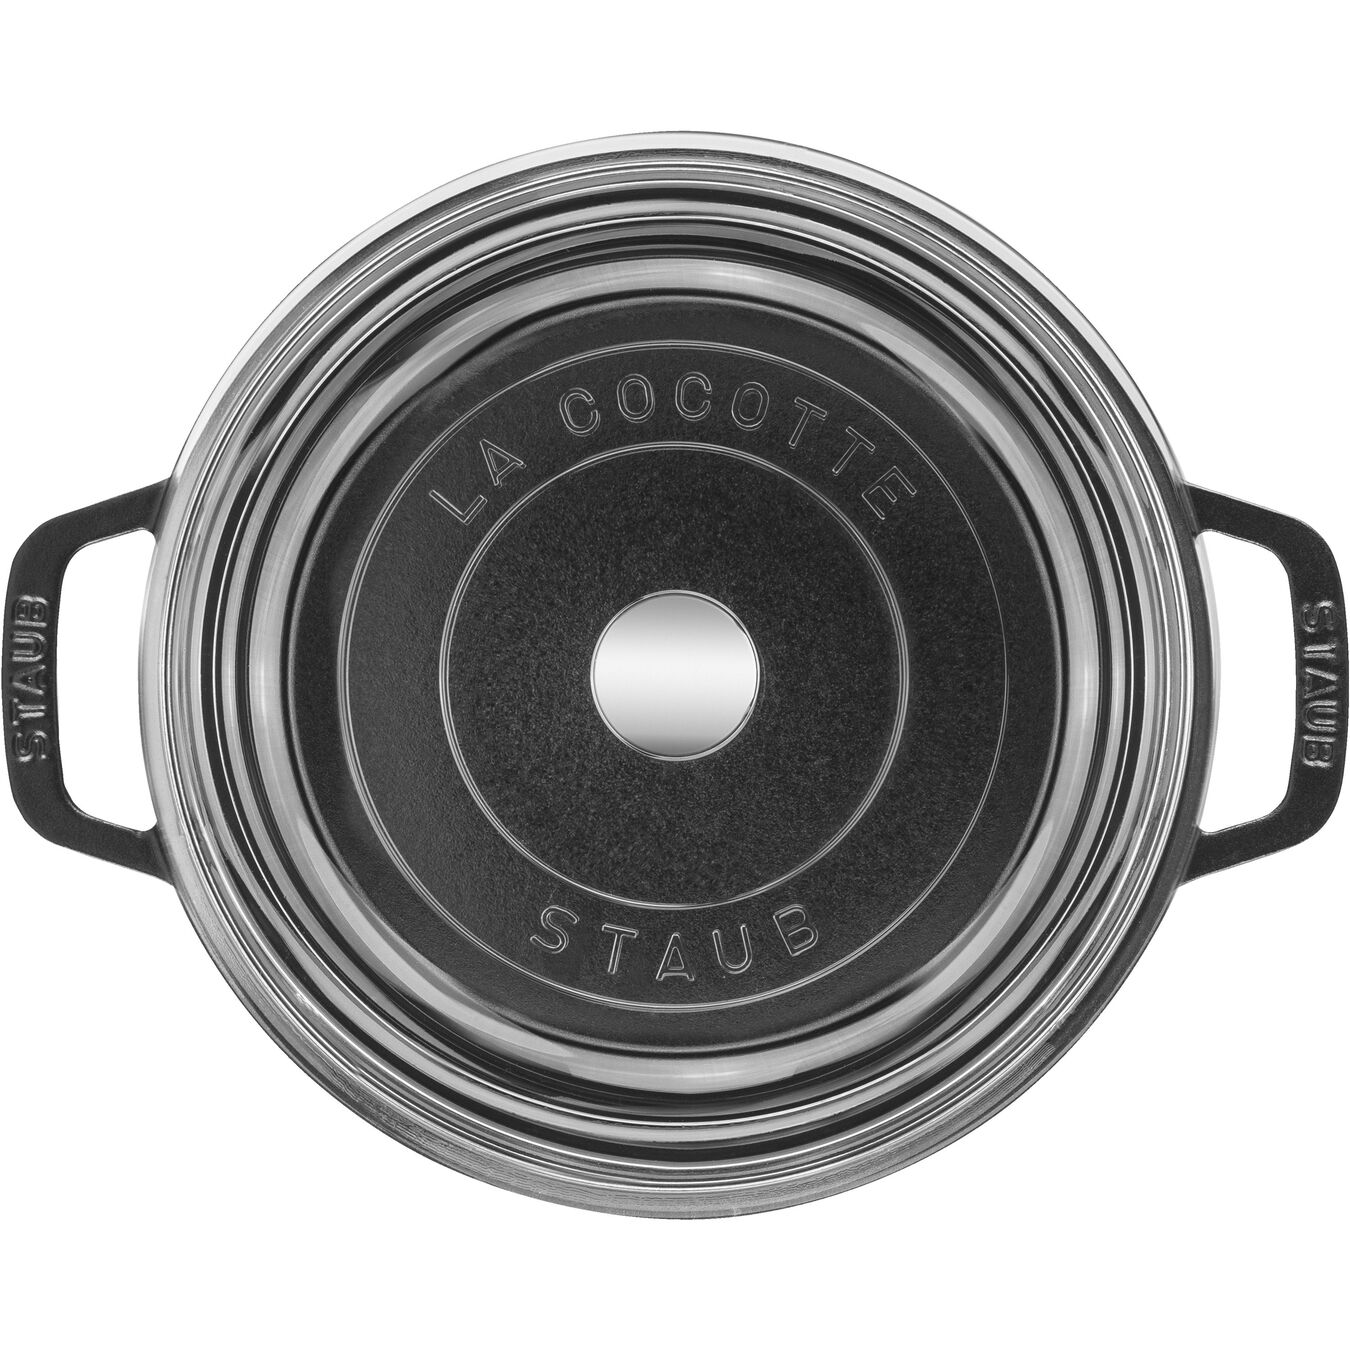 3.8 l cast iron round Cocotte with glass lid, black,,large 2